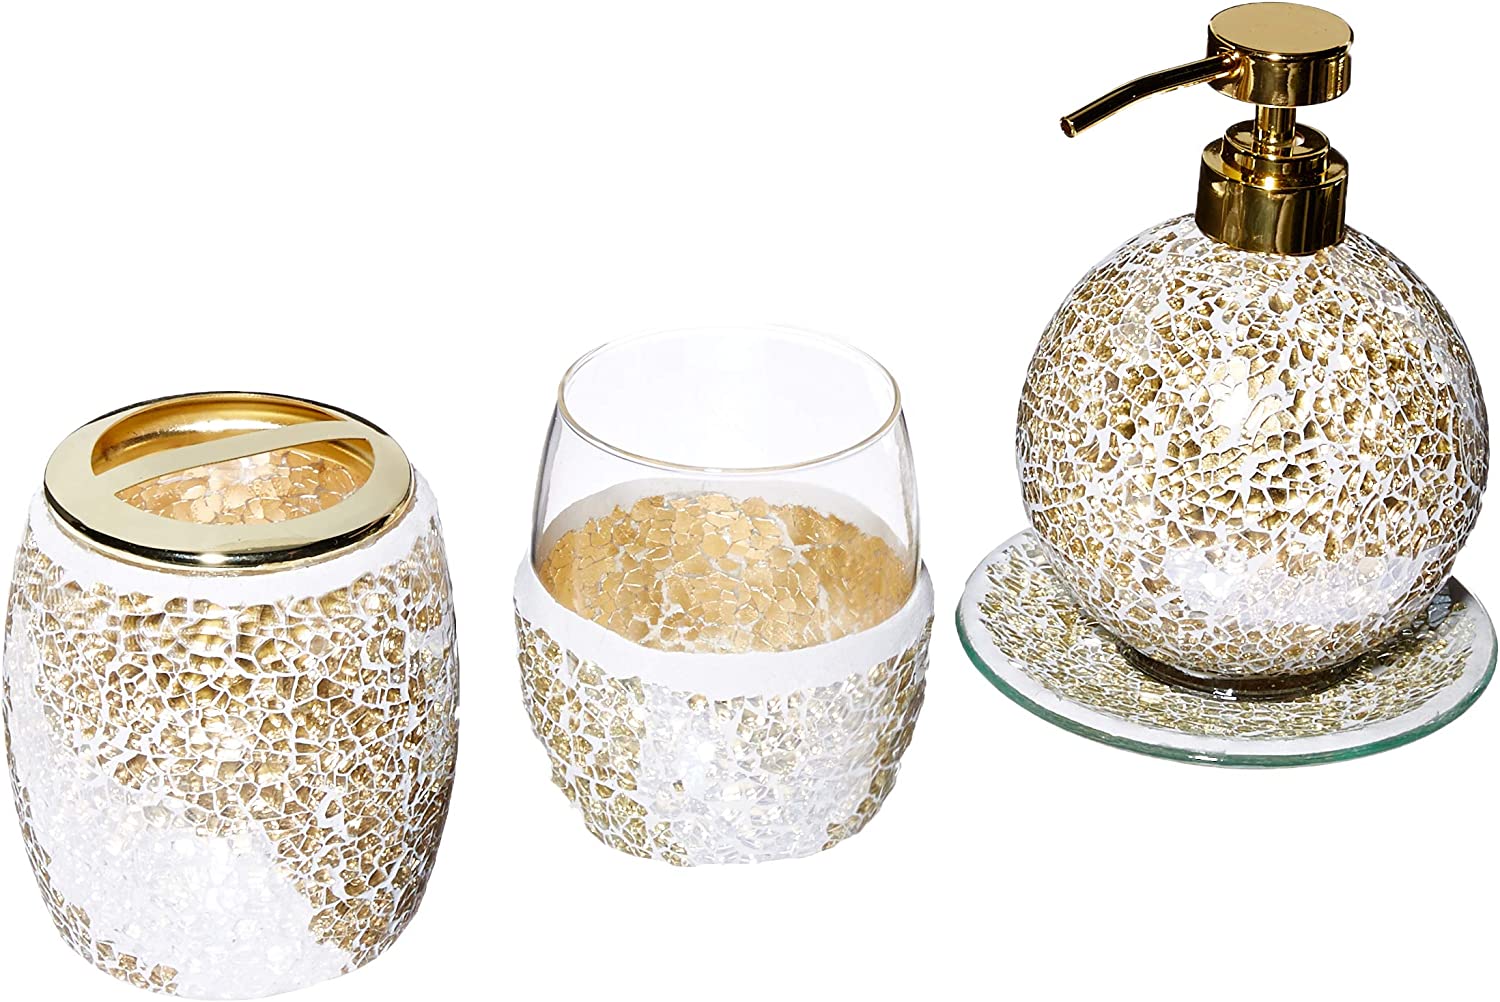 Mosaic Bathroom Accessories Set , 4 Piece Bath Accessory Sets With Gold Soap Dispenser , Toothbrush Holder , Tumbler And Ring Tray